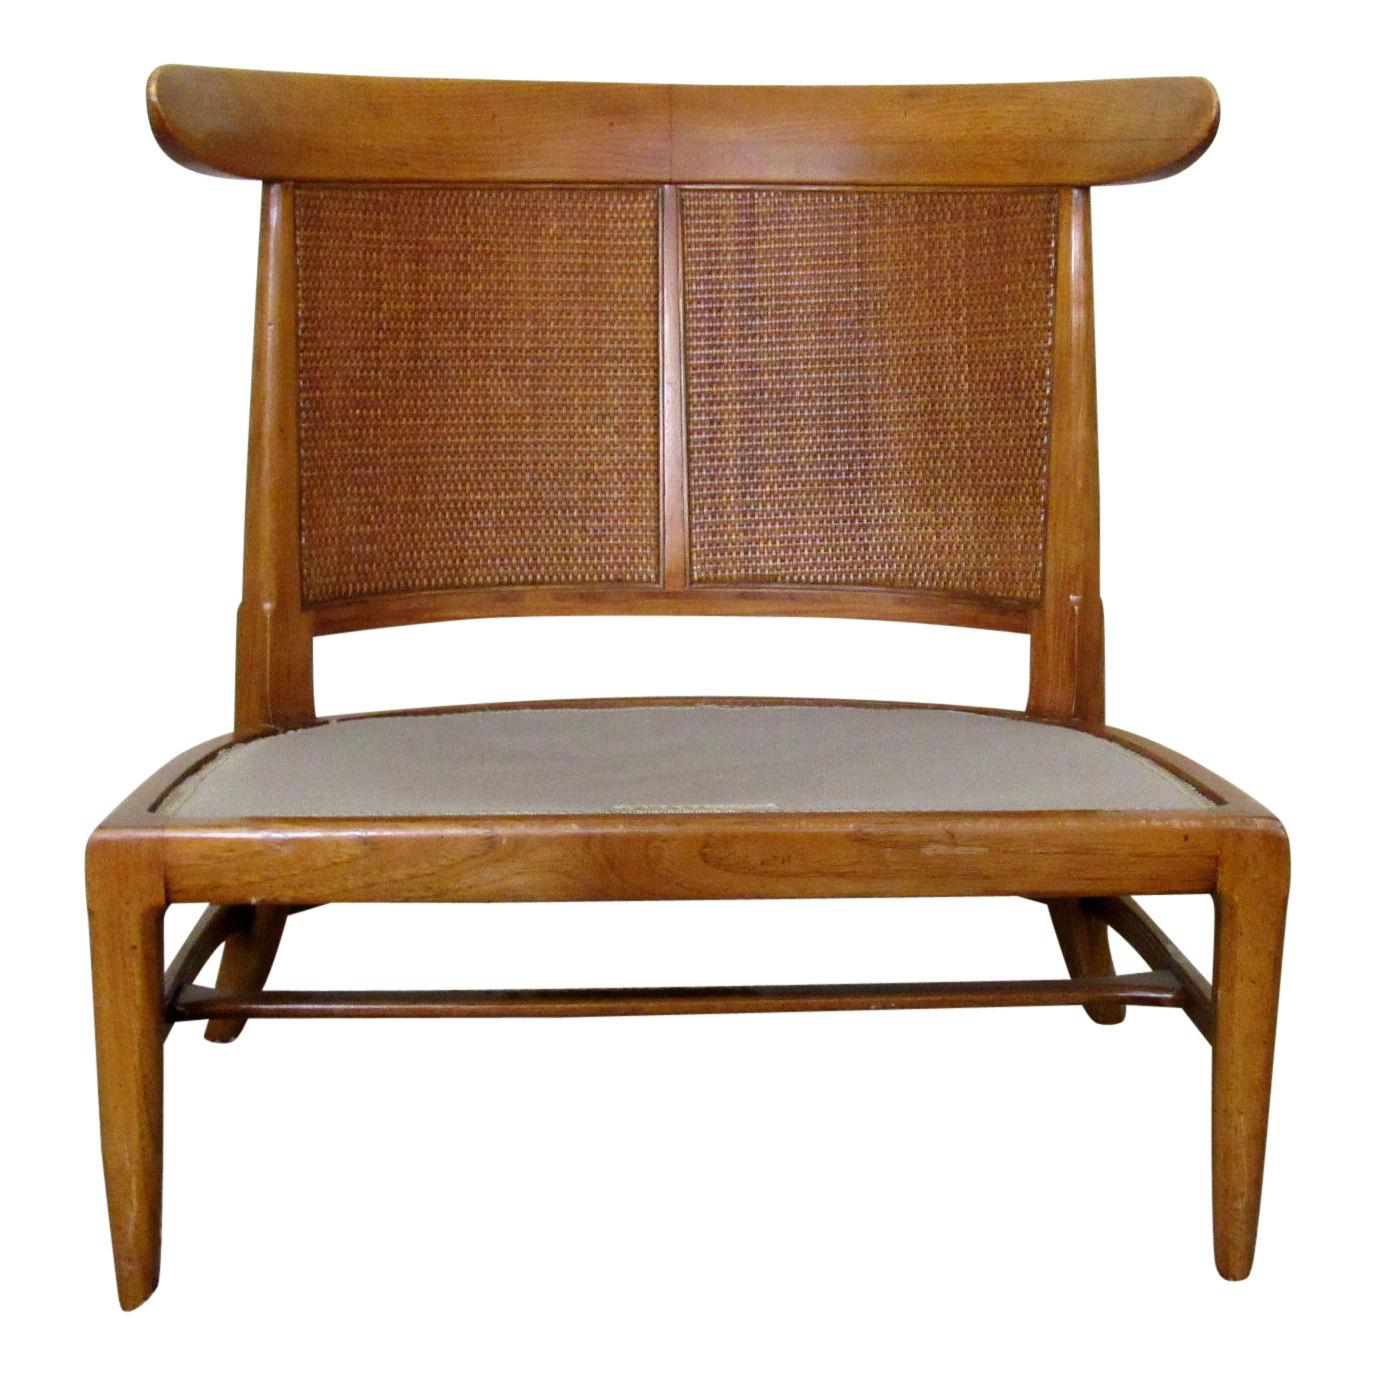 Upholstery Four Midcentury Tomlinson Sophisticate Slipper Chairs, circa 1956 For Sale